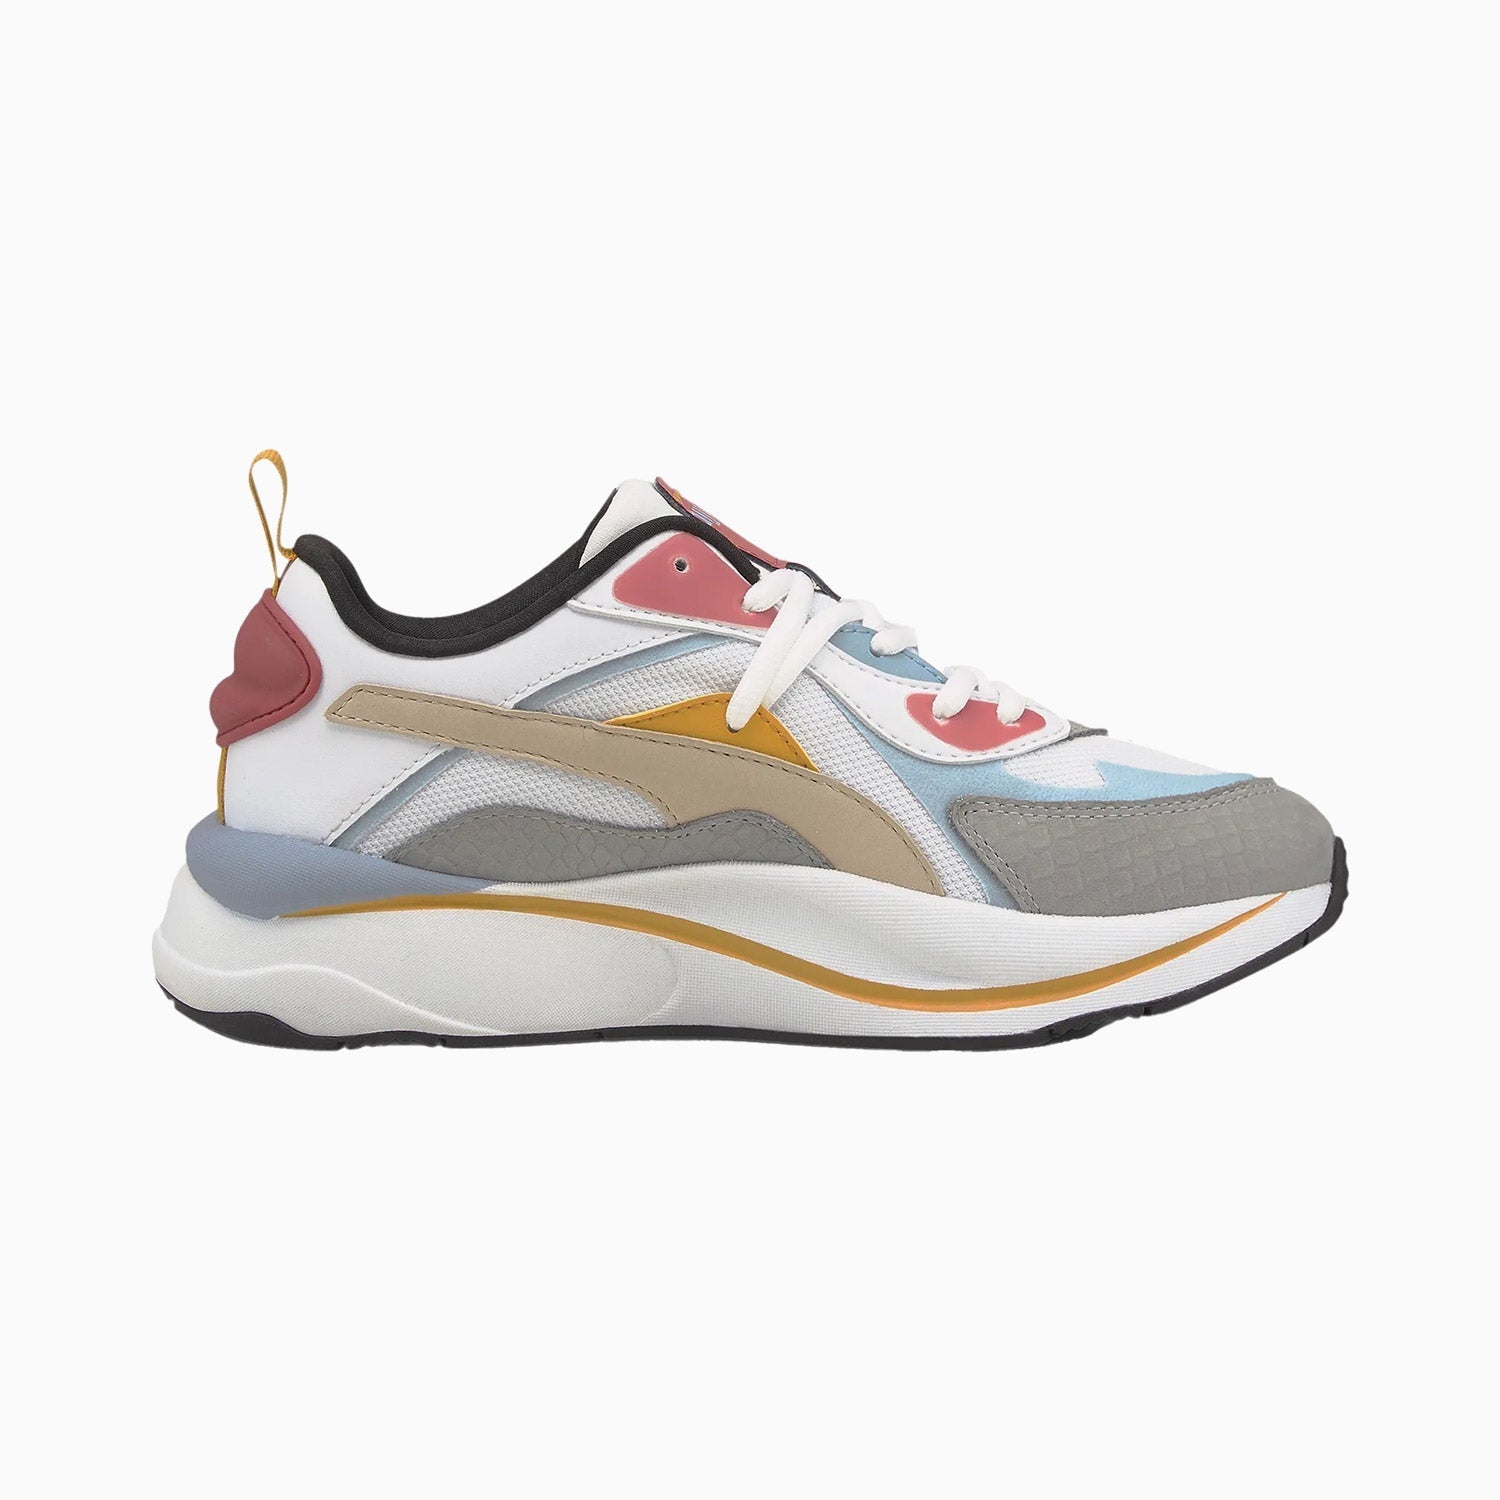 puma-womens-rs-curve-bright-height-shoes-382750-01